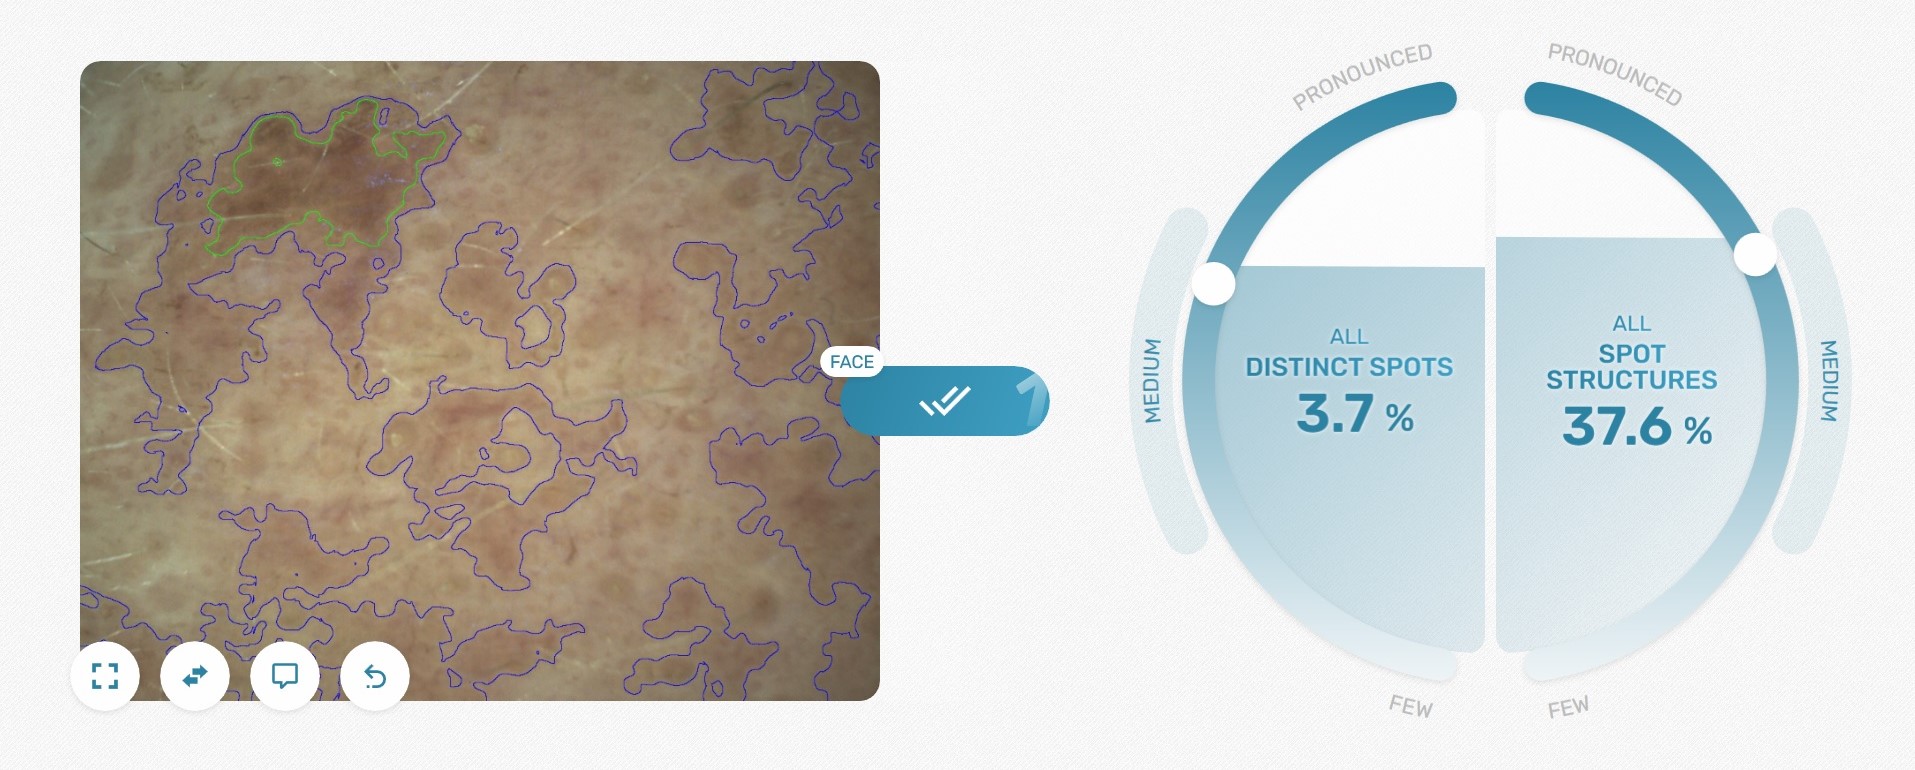 Visioscope®: detection of distinct spots and complex spot structures